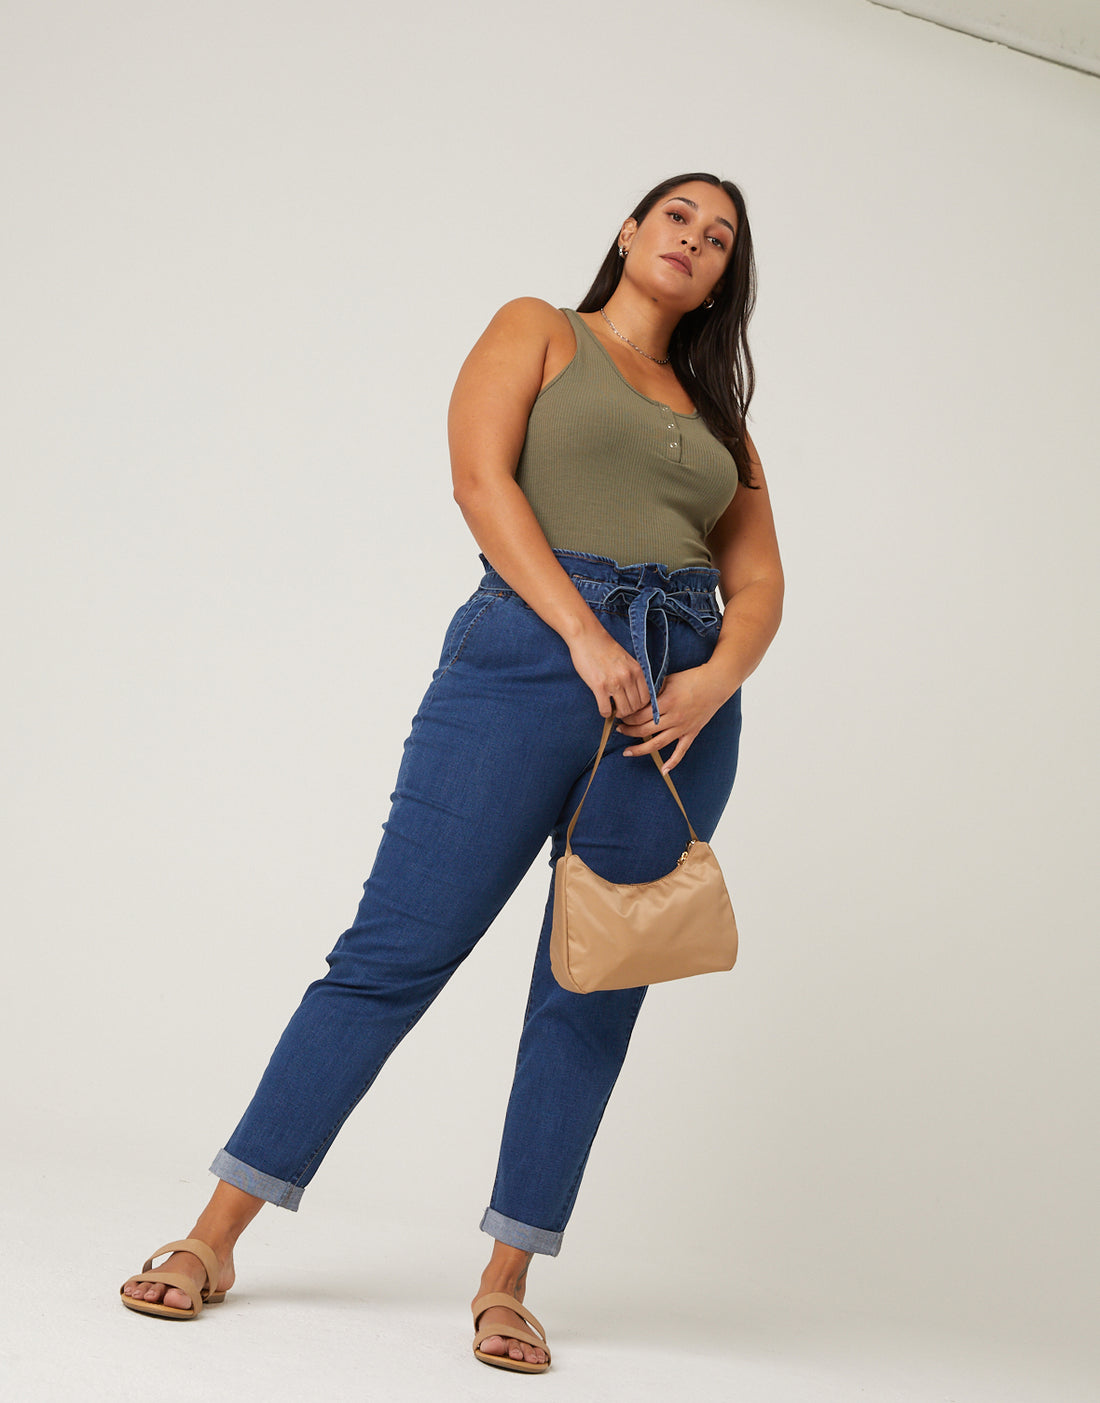 Curve Around and About Tank Plus Size Tops -2020AVE